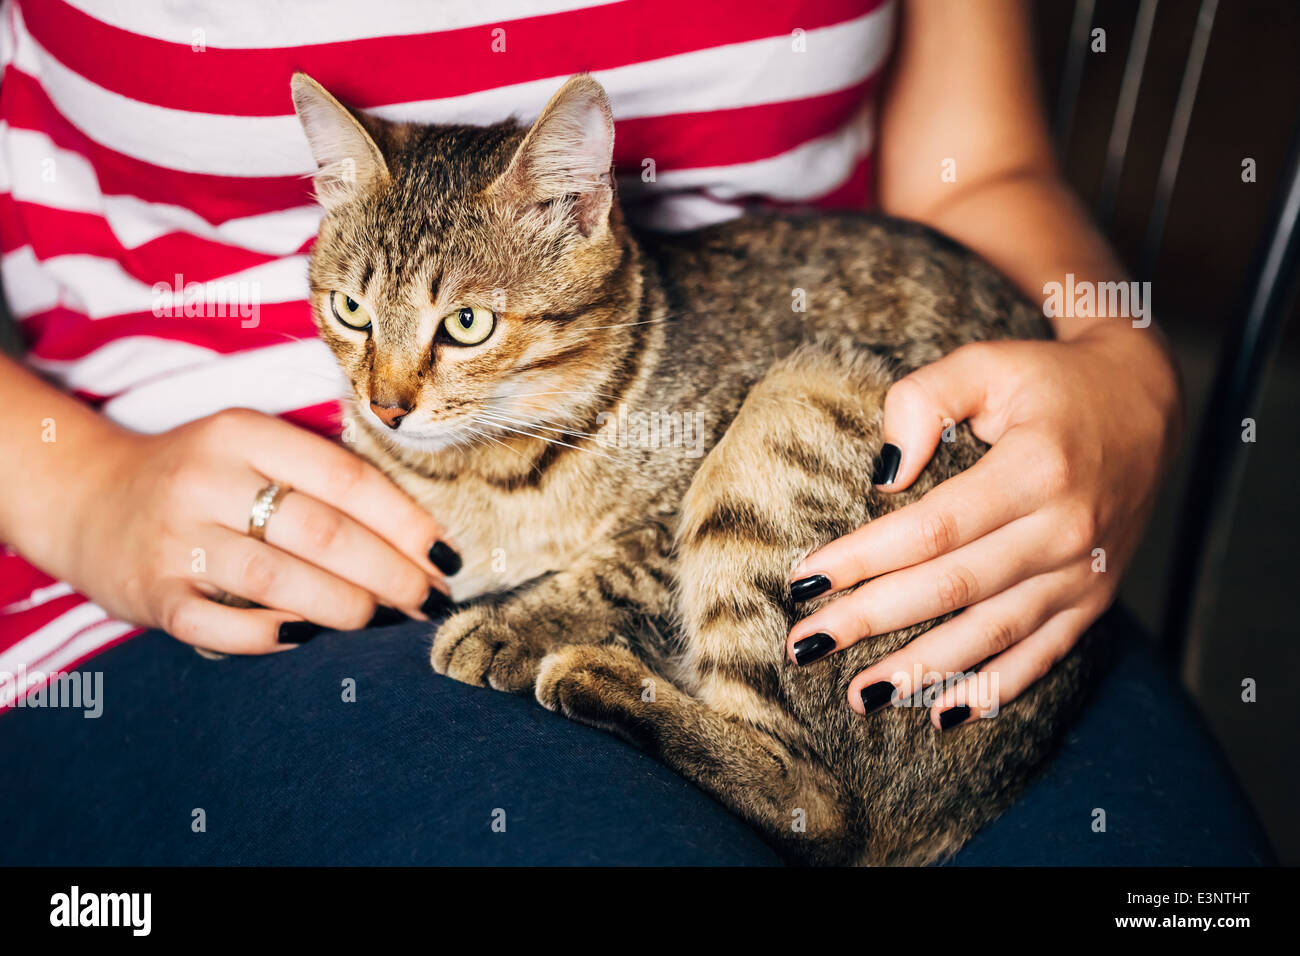 Close Up Portrait Peaceful Tabby Male Kitten Cat Sitting On The Hands Of The Girl Stock Photo